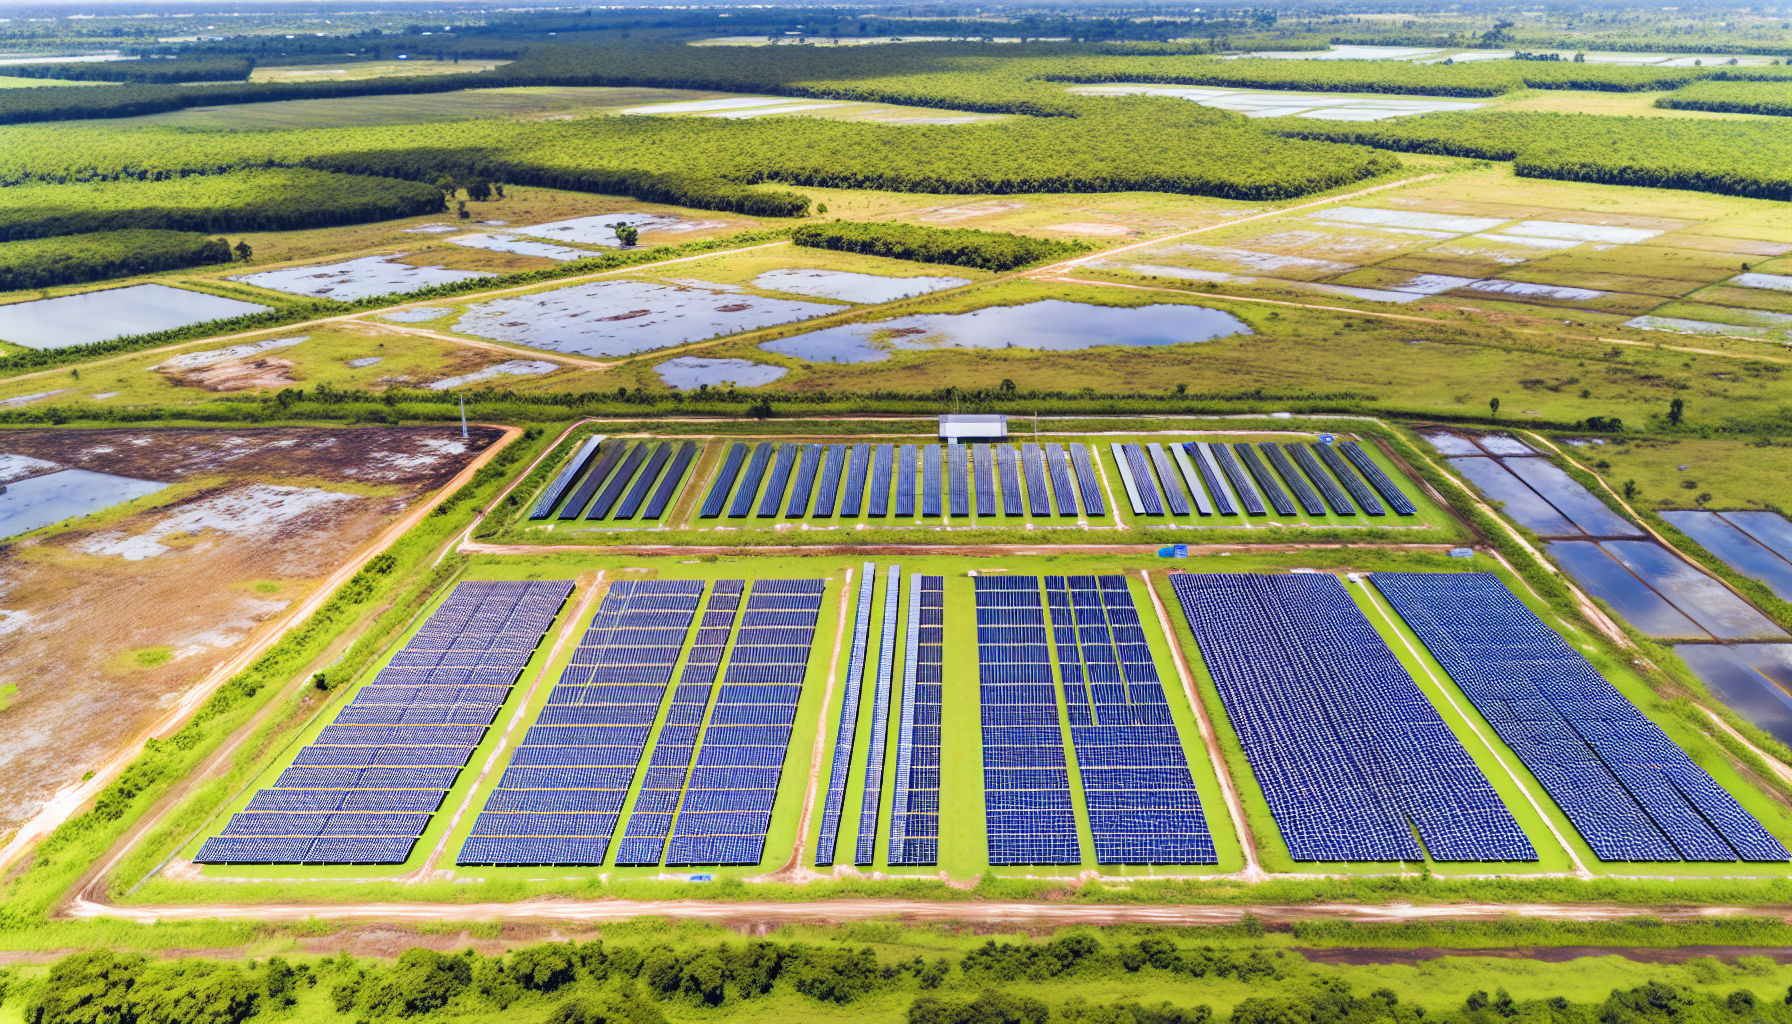 Aerial view of solar panels in a rural area